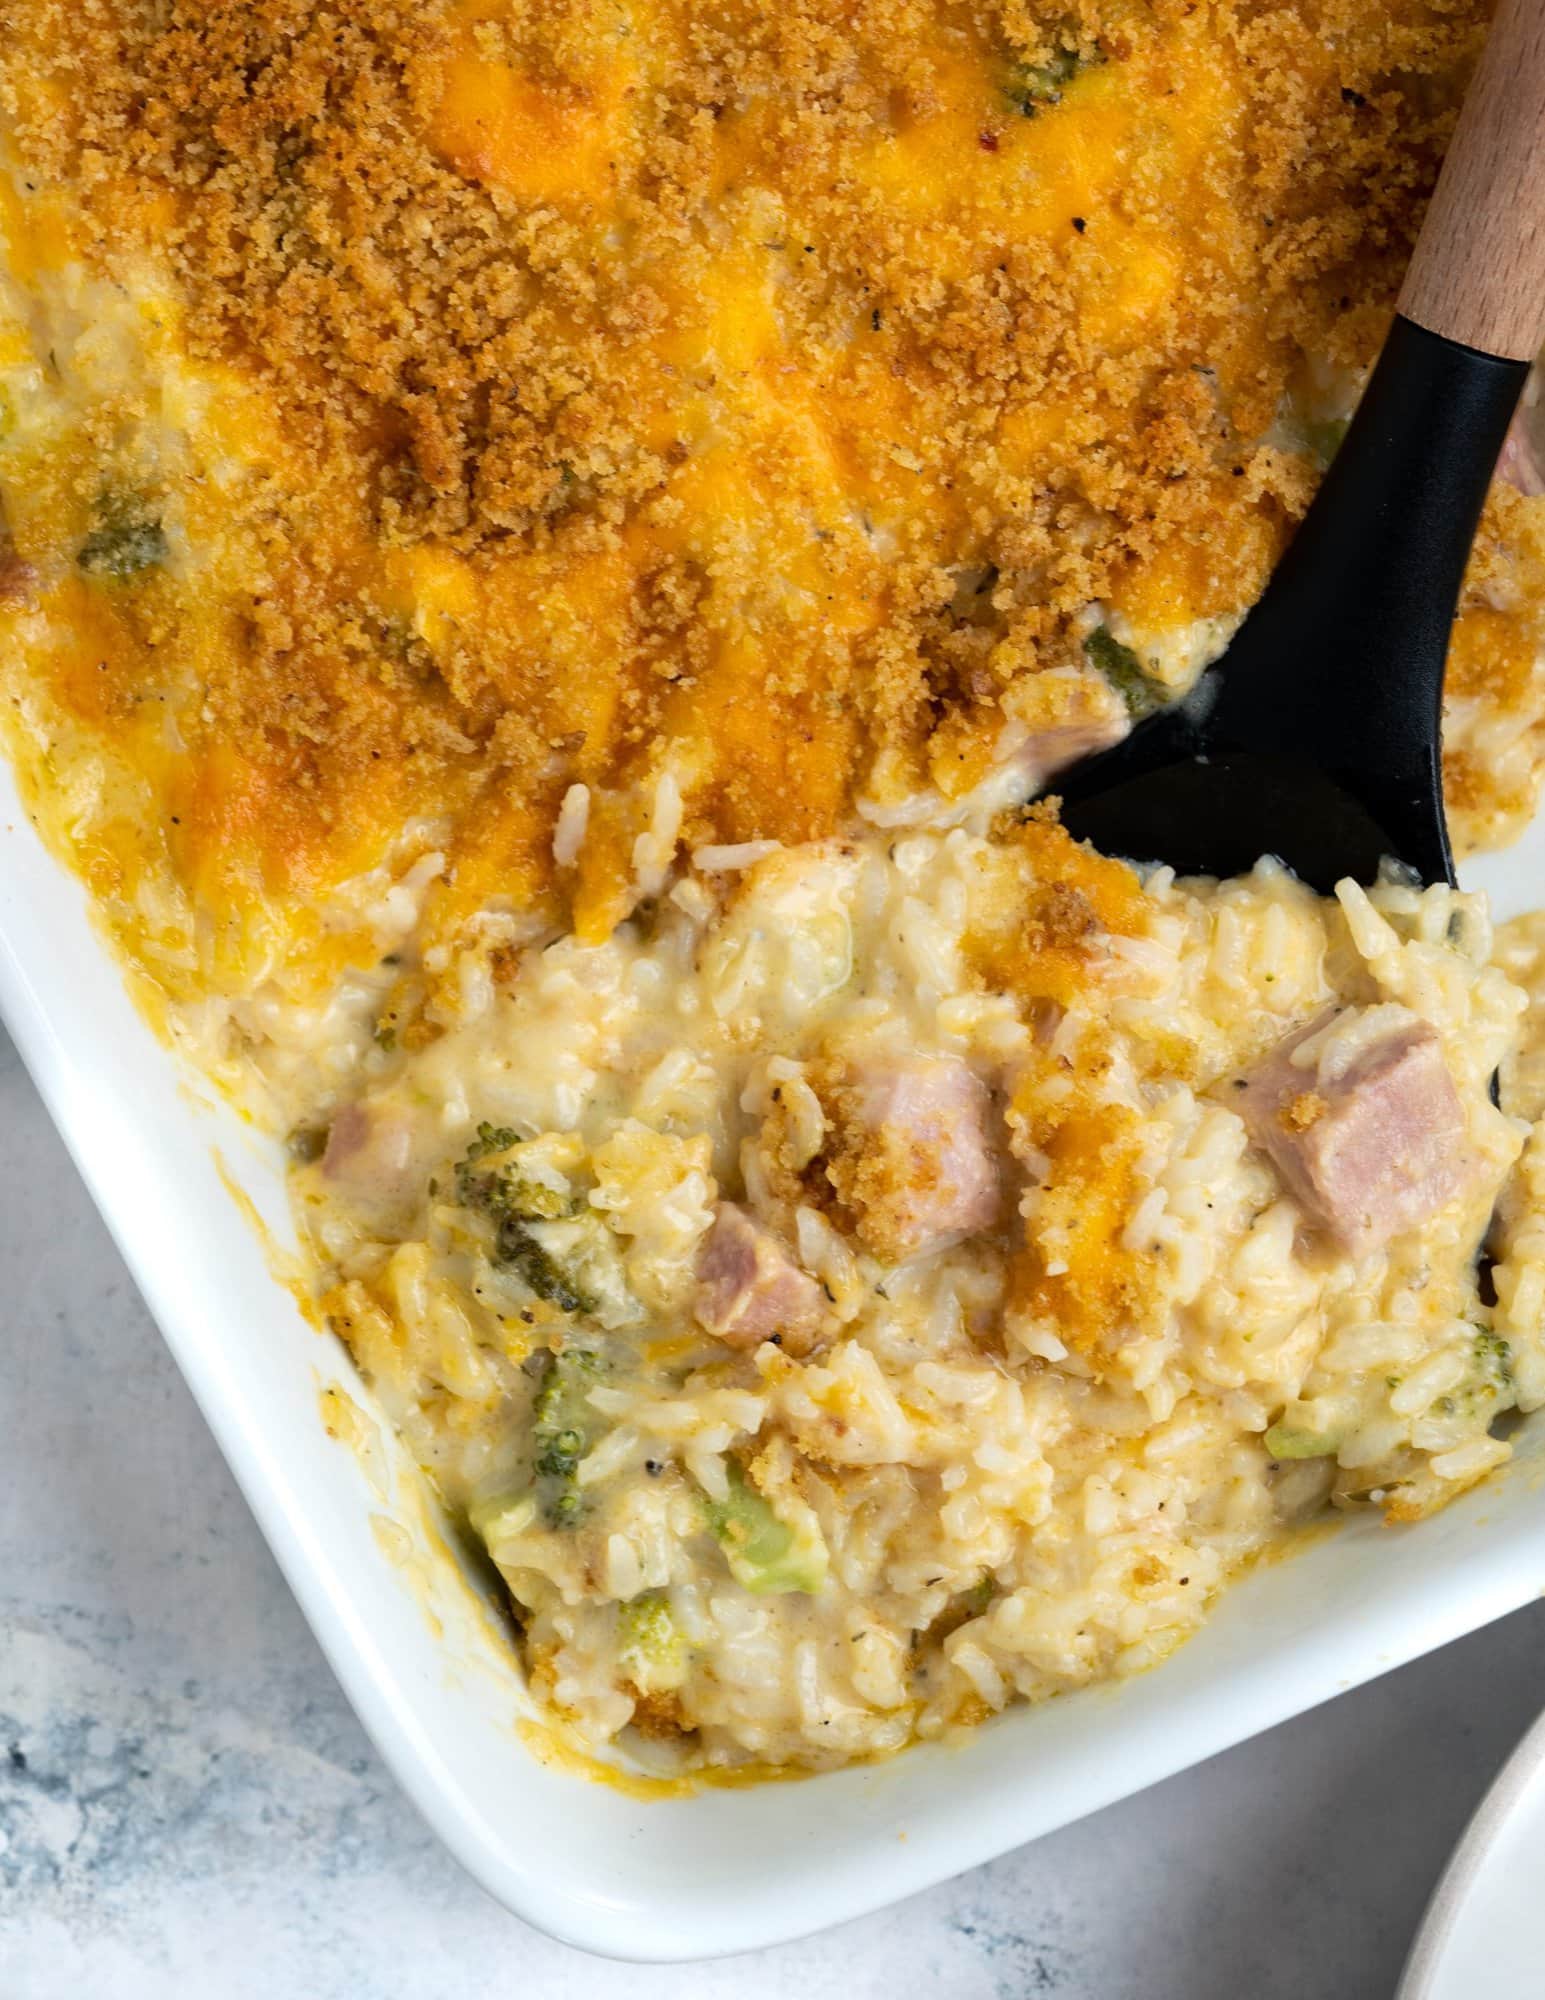 Corner of the casserole showing golden brown crust and underneath that a creamy mix of rice, ham, and broccoli.